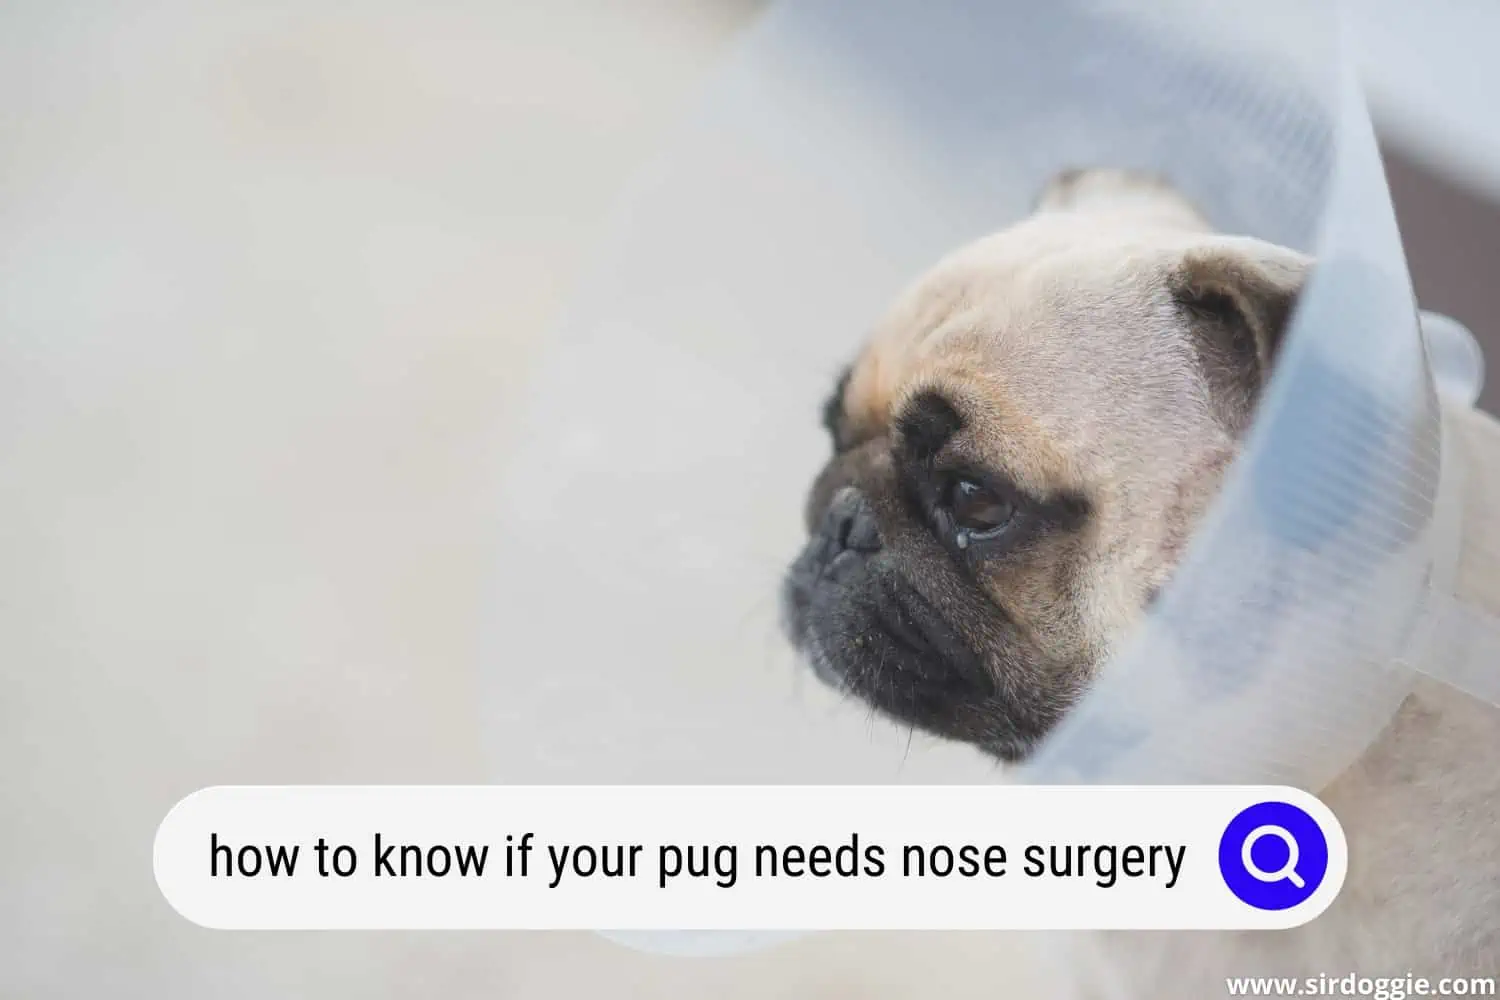 how to know if your pug needs nose surgery